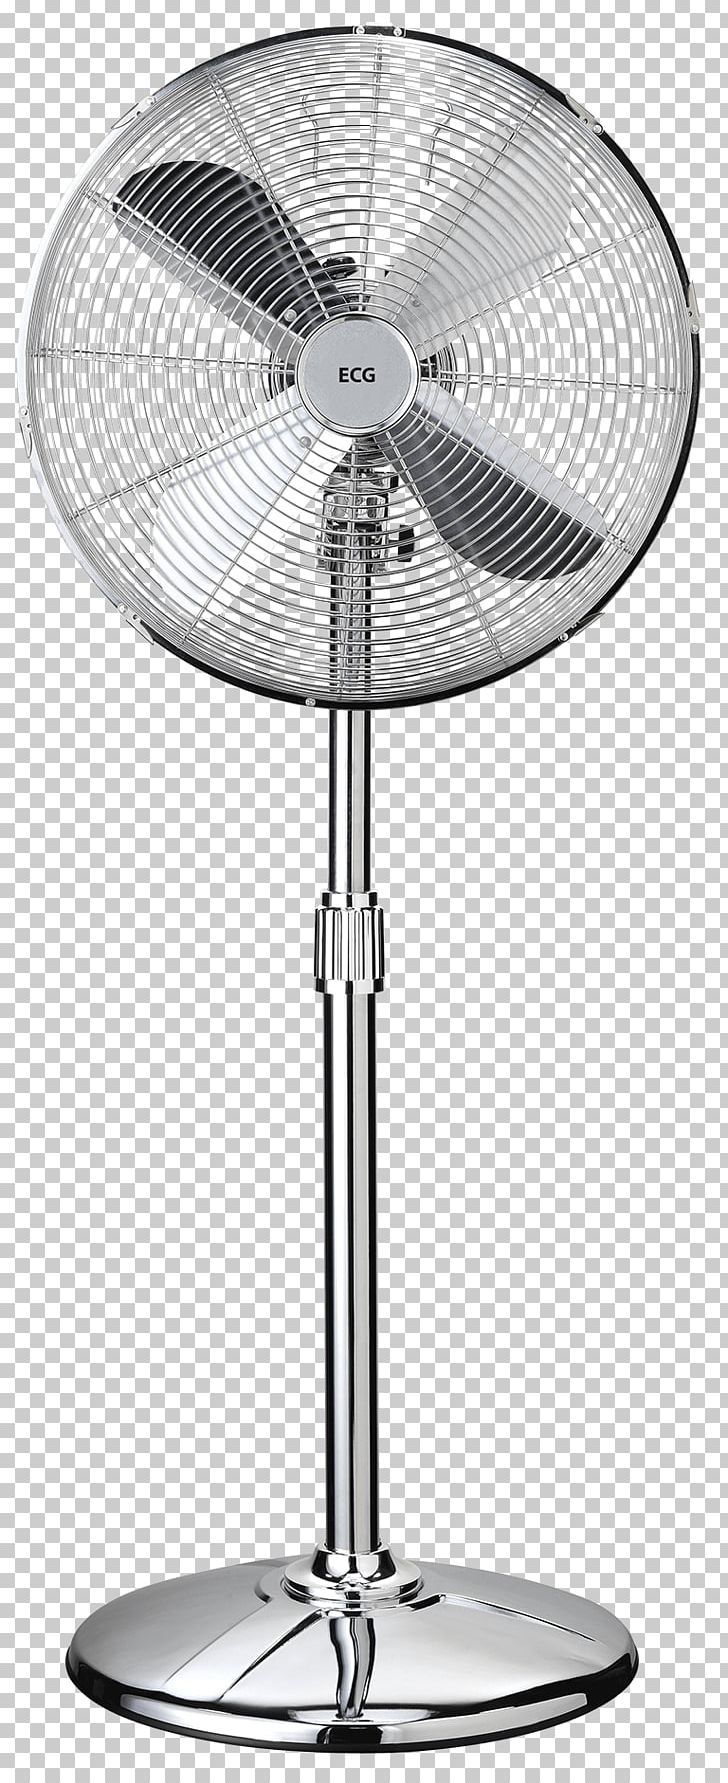 Fan Electrocardiography Steel Length Ventilation PNG, Clipart, Air, Diameter, Ecg, Electrocardiography, Fan Free PNG Download